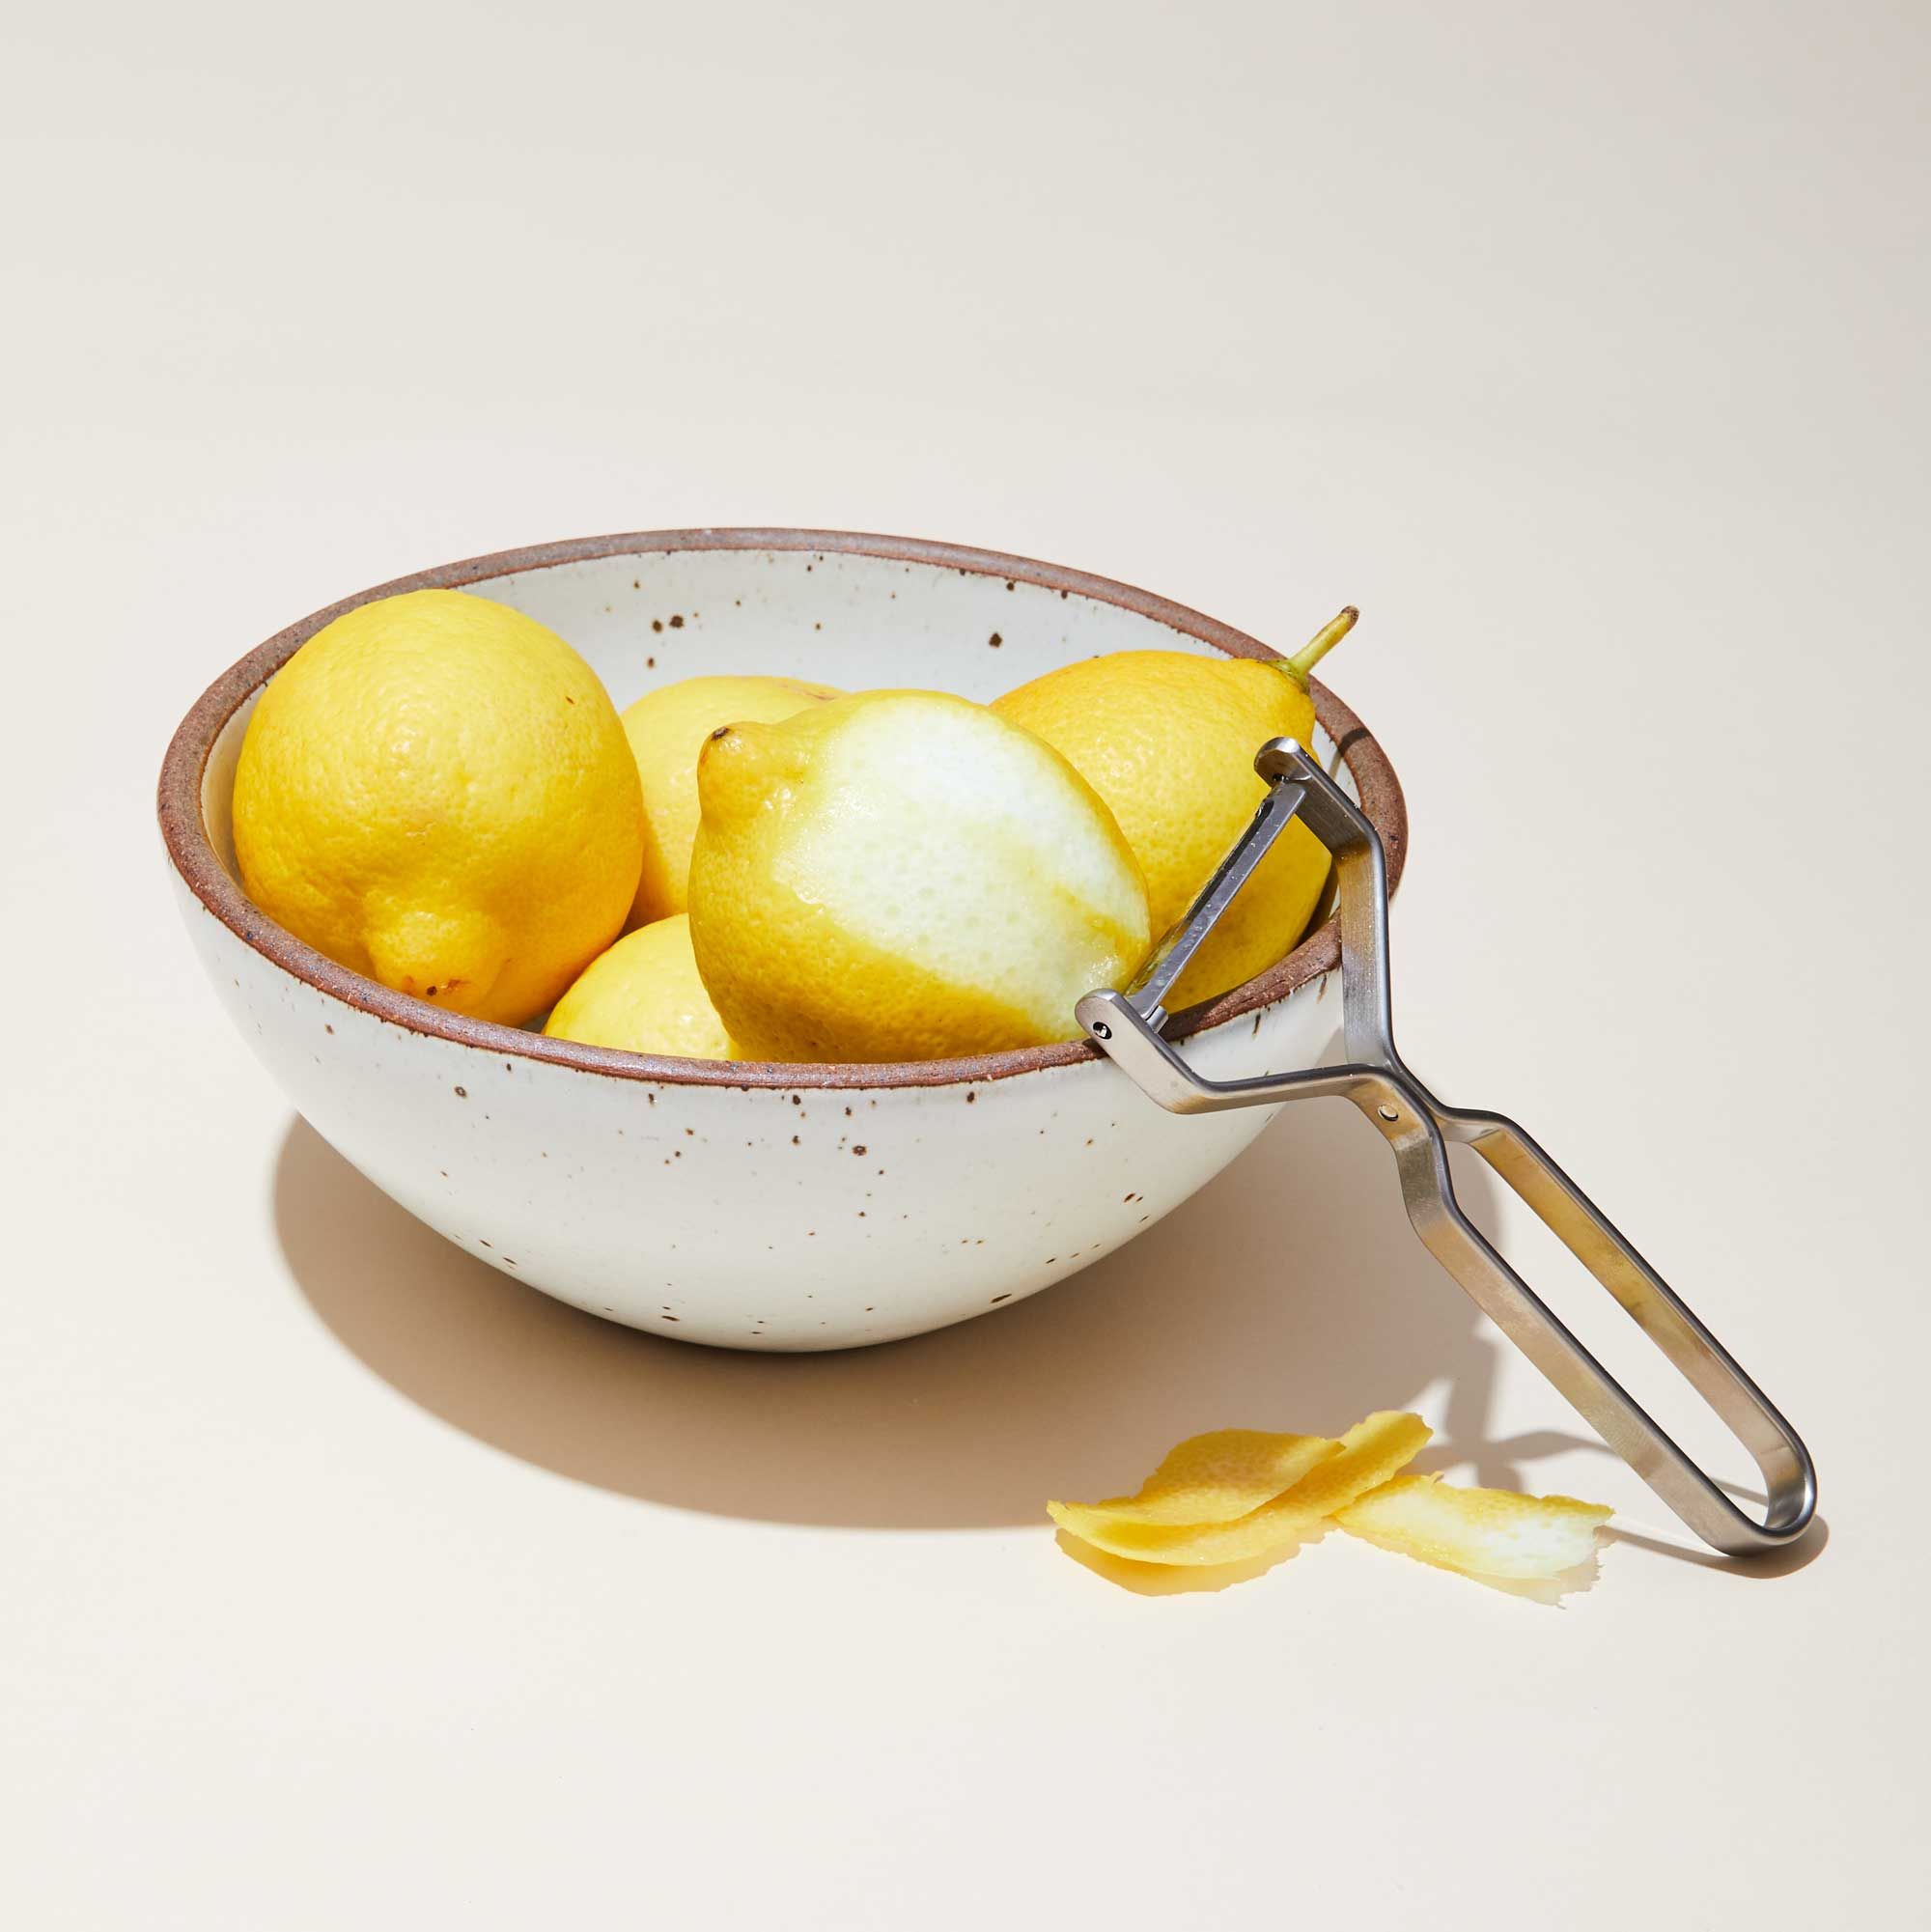 A stainless steel peeler rests against the rim of an East Fork bowl that is filled with lemons, one of which is partially peeler.